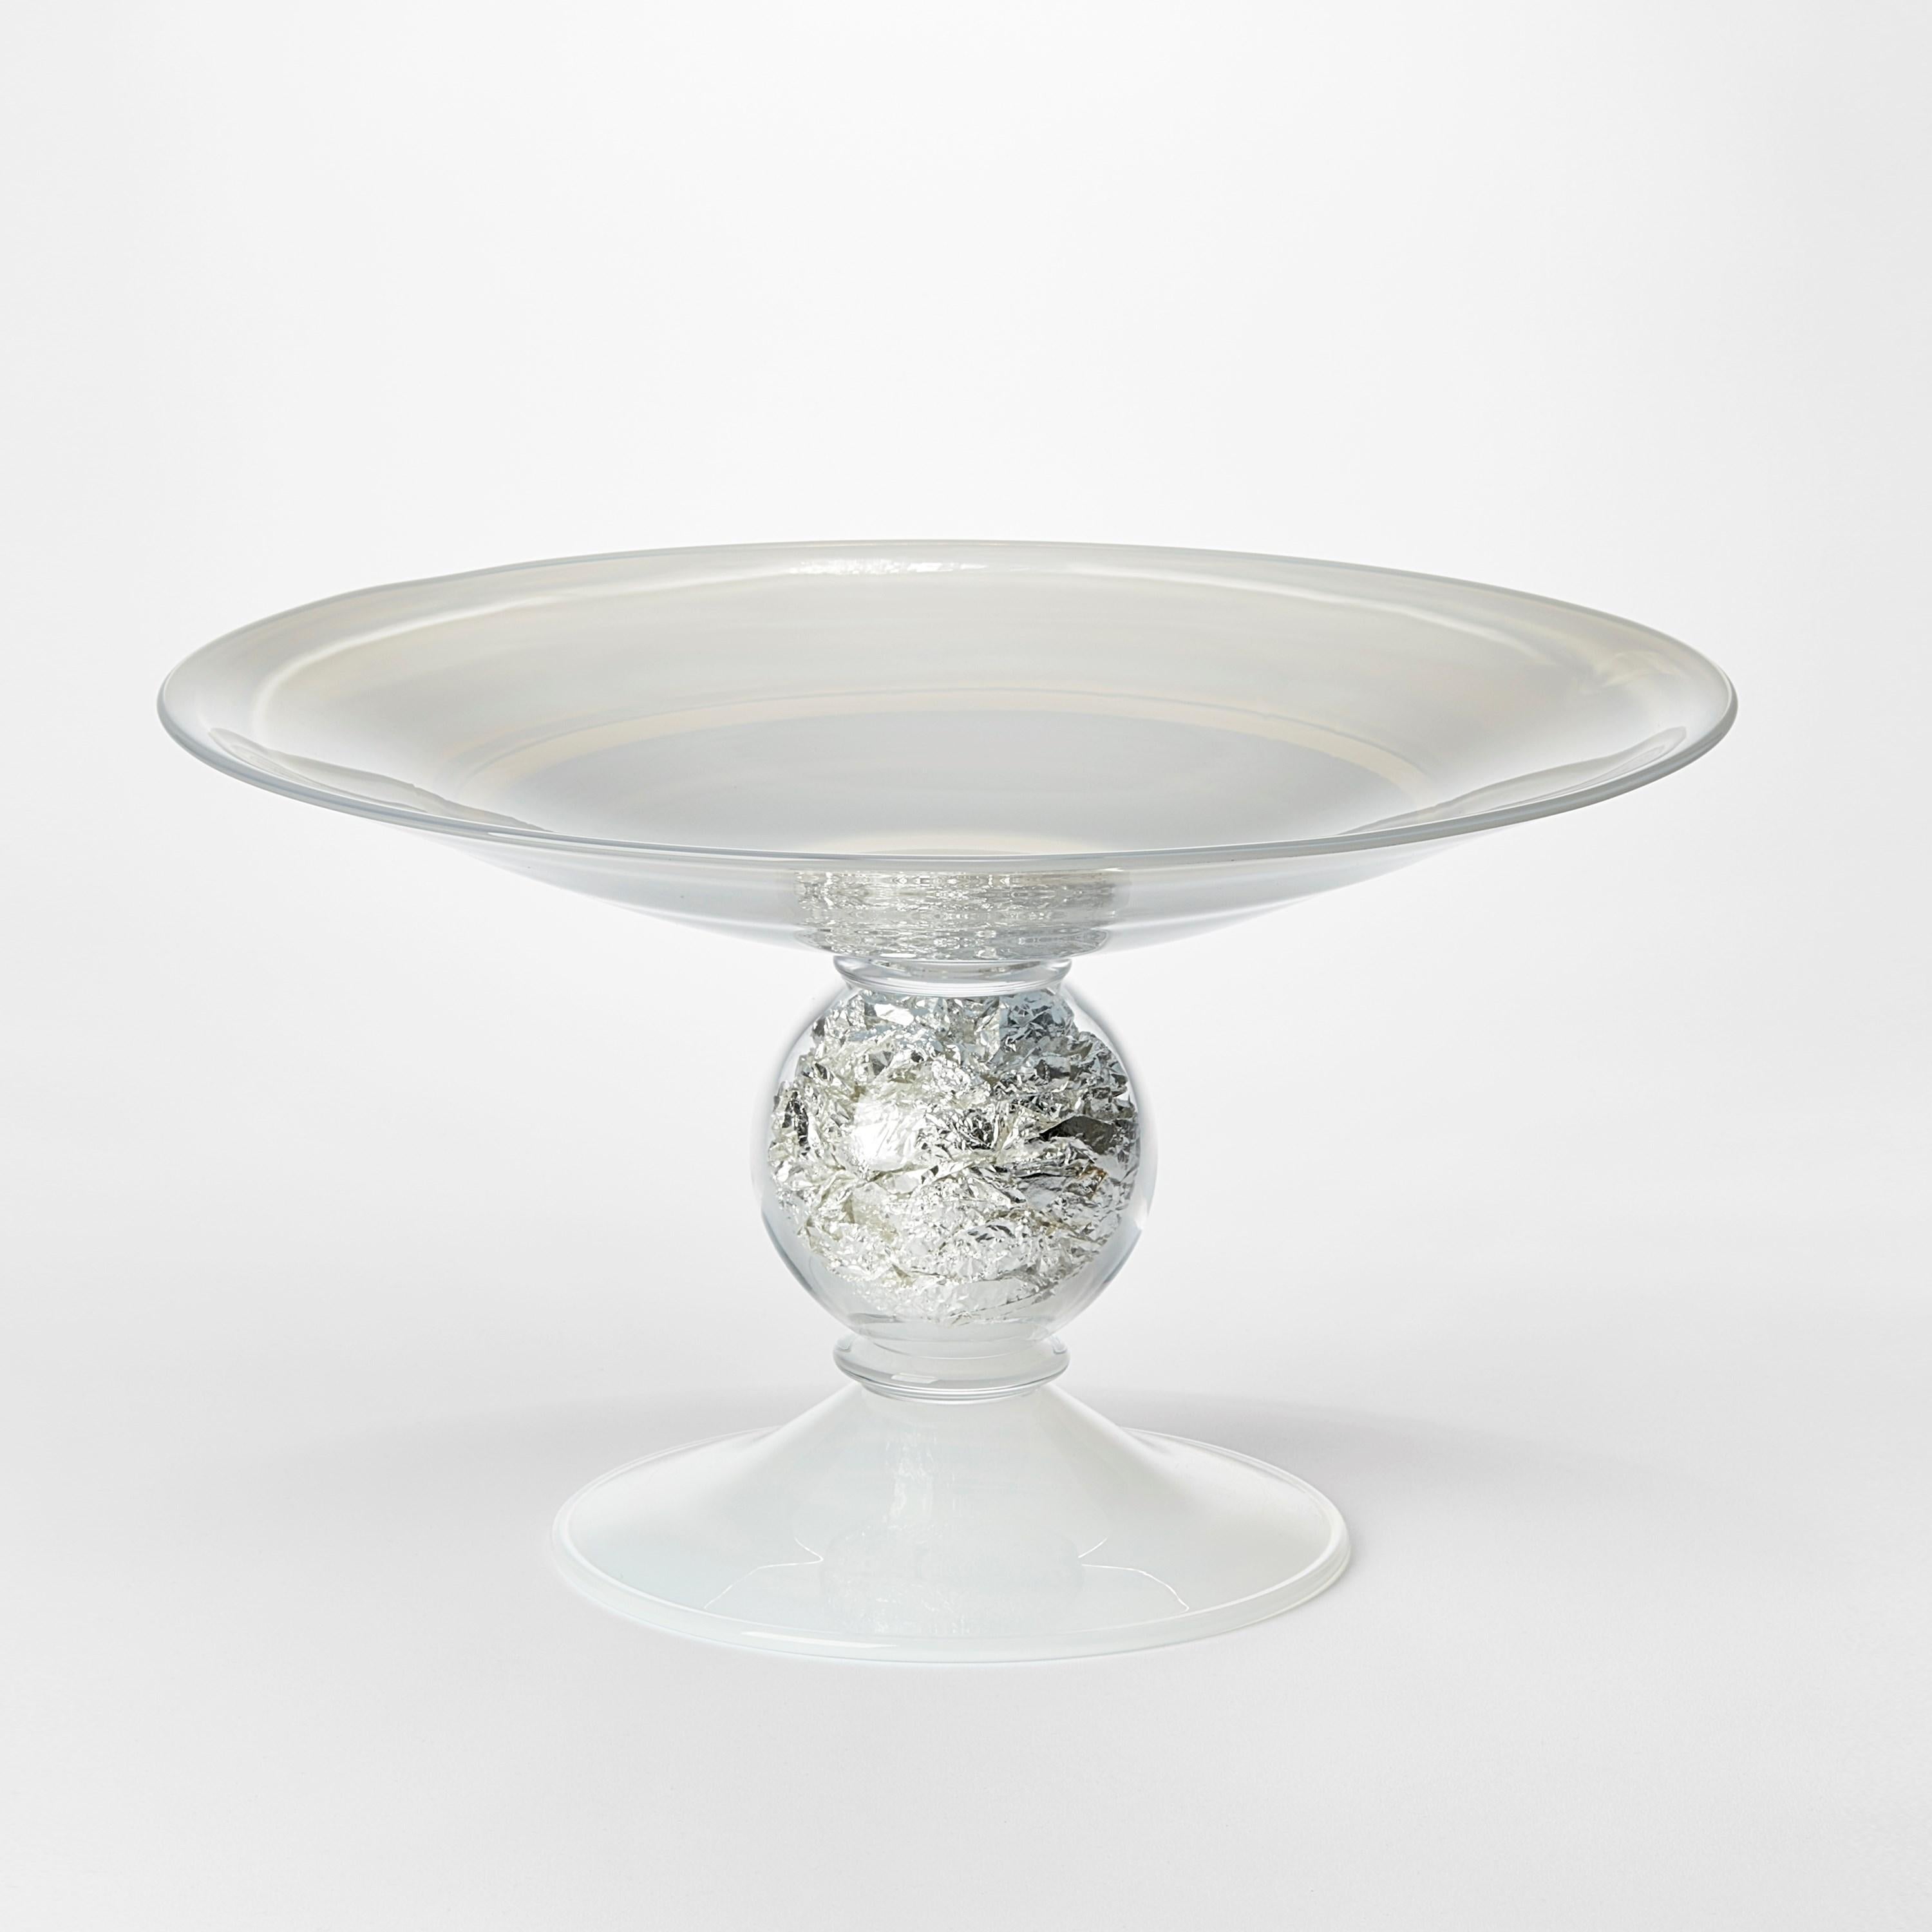 ‘Gambo d’Argento’ (Stem of Silver) is a unique centrepiece by the British artists, Anthony Scala and Liam Reeves.

With very differing practices, Scala and Reeves have collaborated to create works that are a unique result of their combined skills.